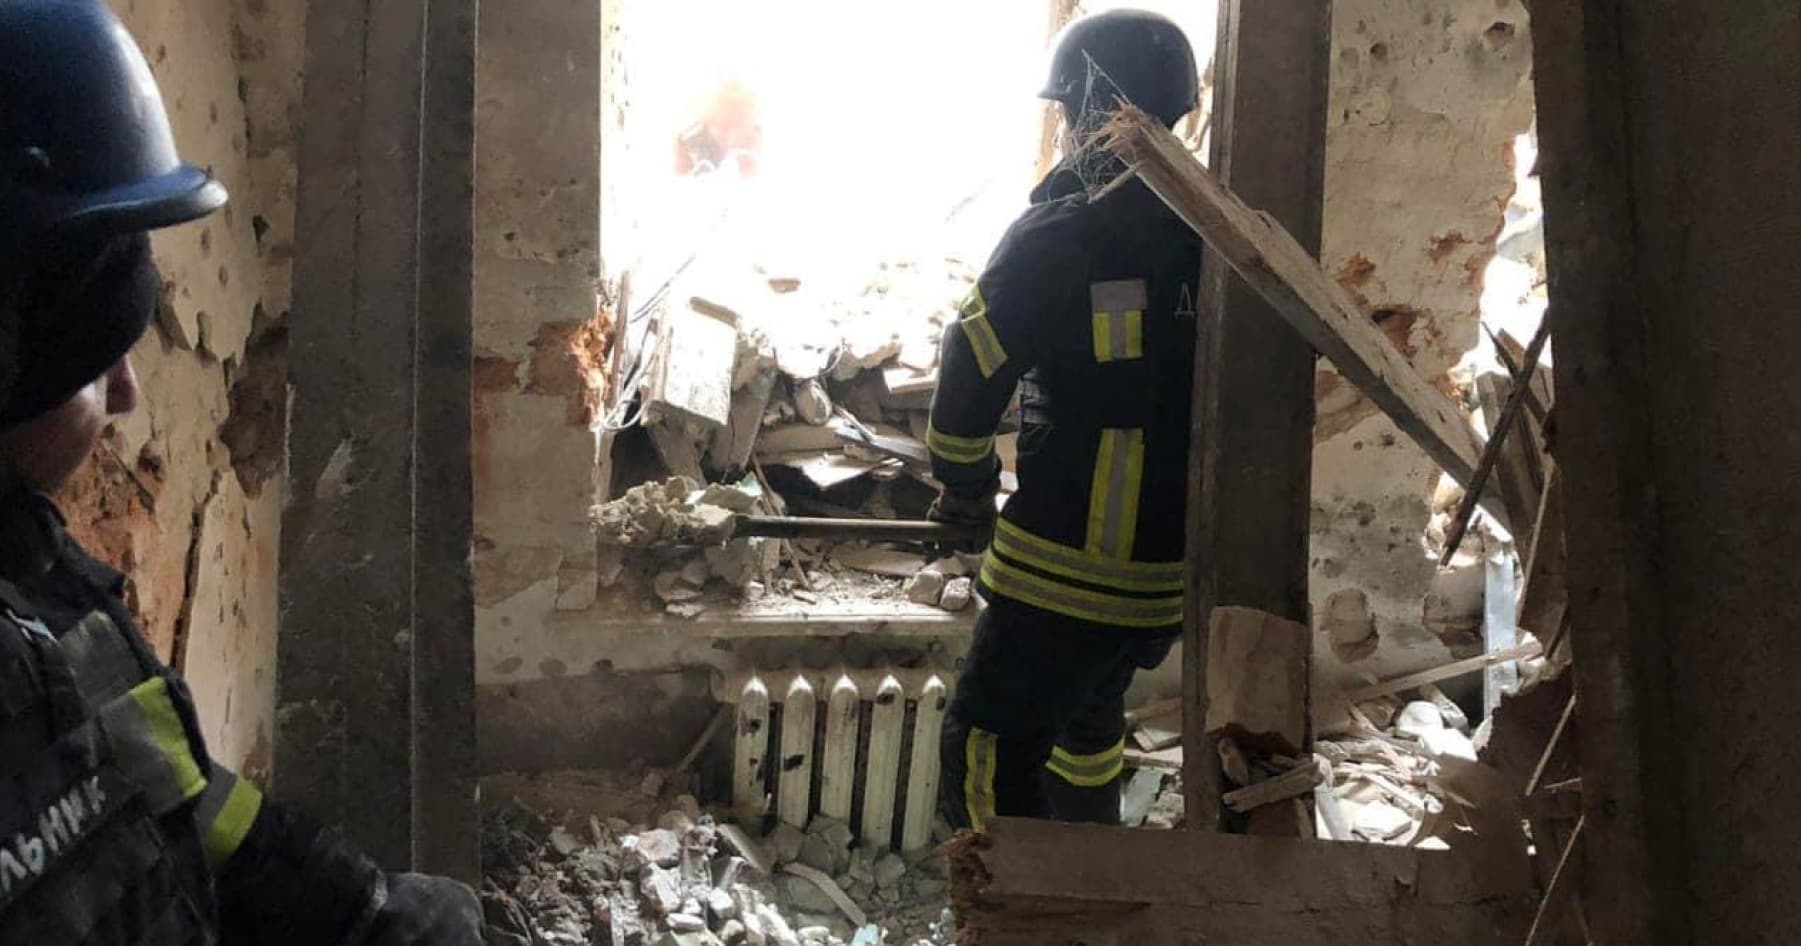 In the Donetsk region, the body of a person who died as a result of Russian shelling was removed from the rubble of the Sviatohirsk Lavra